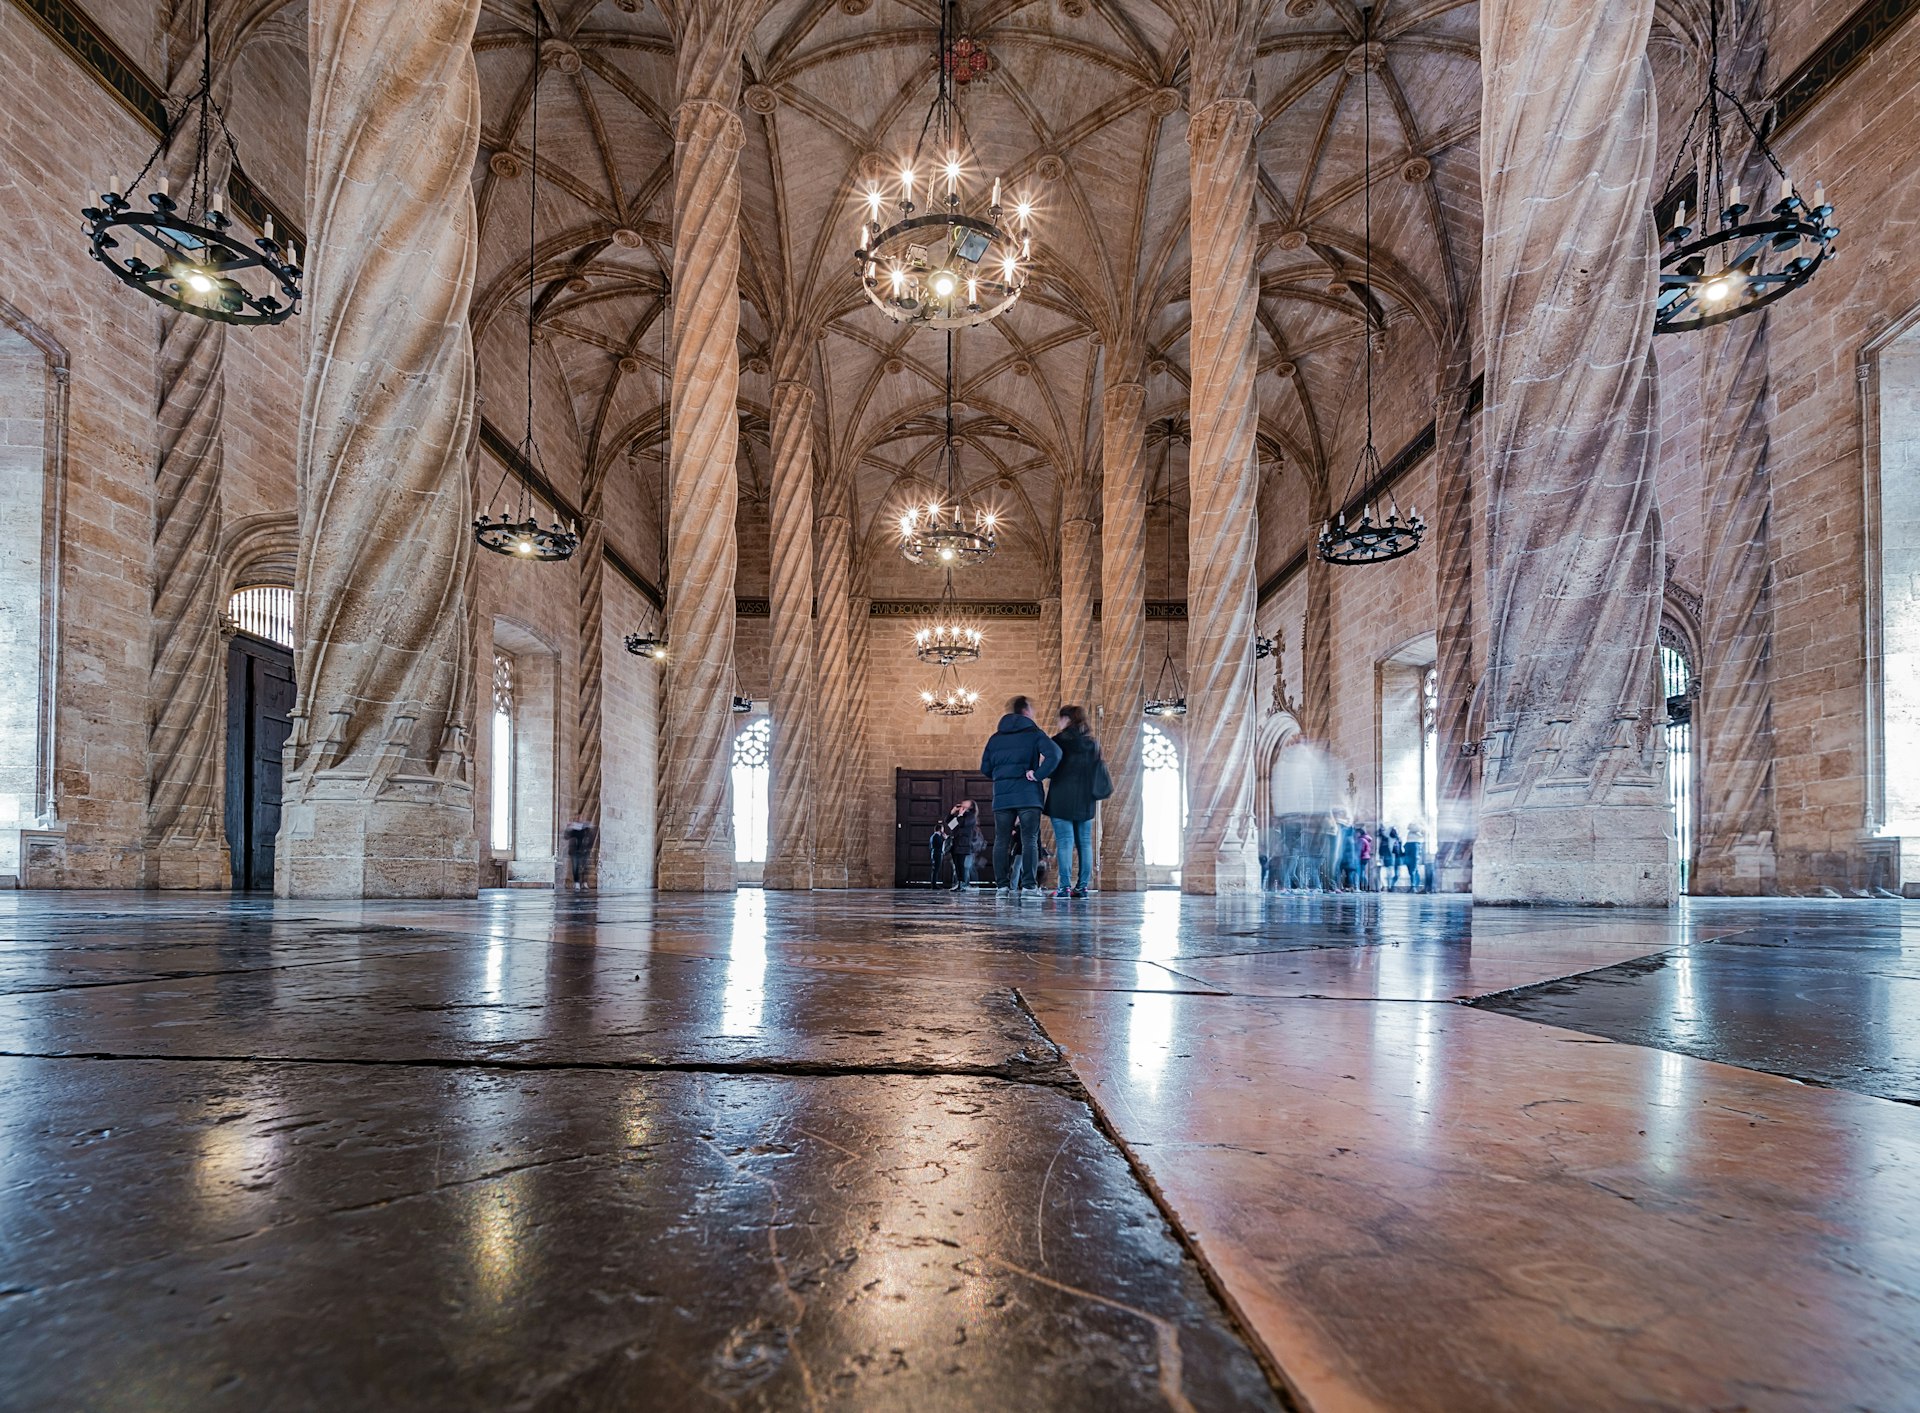 People explore an old building in the Valencia Gothic style